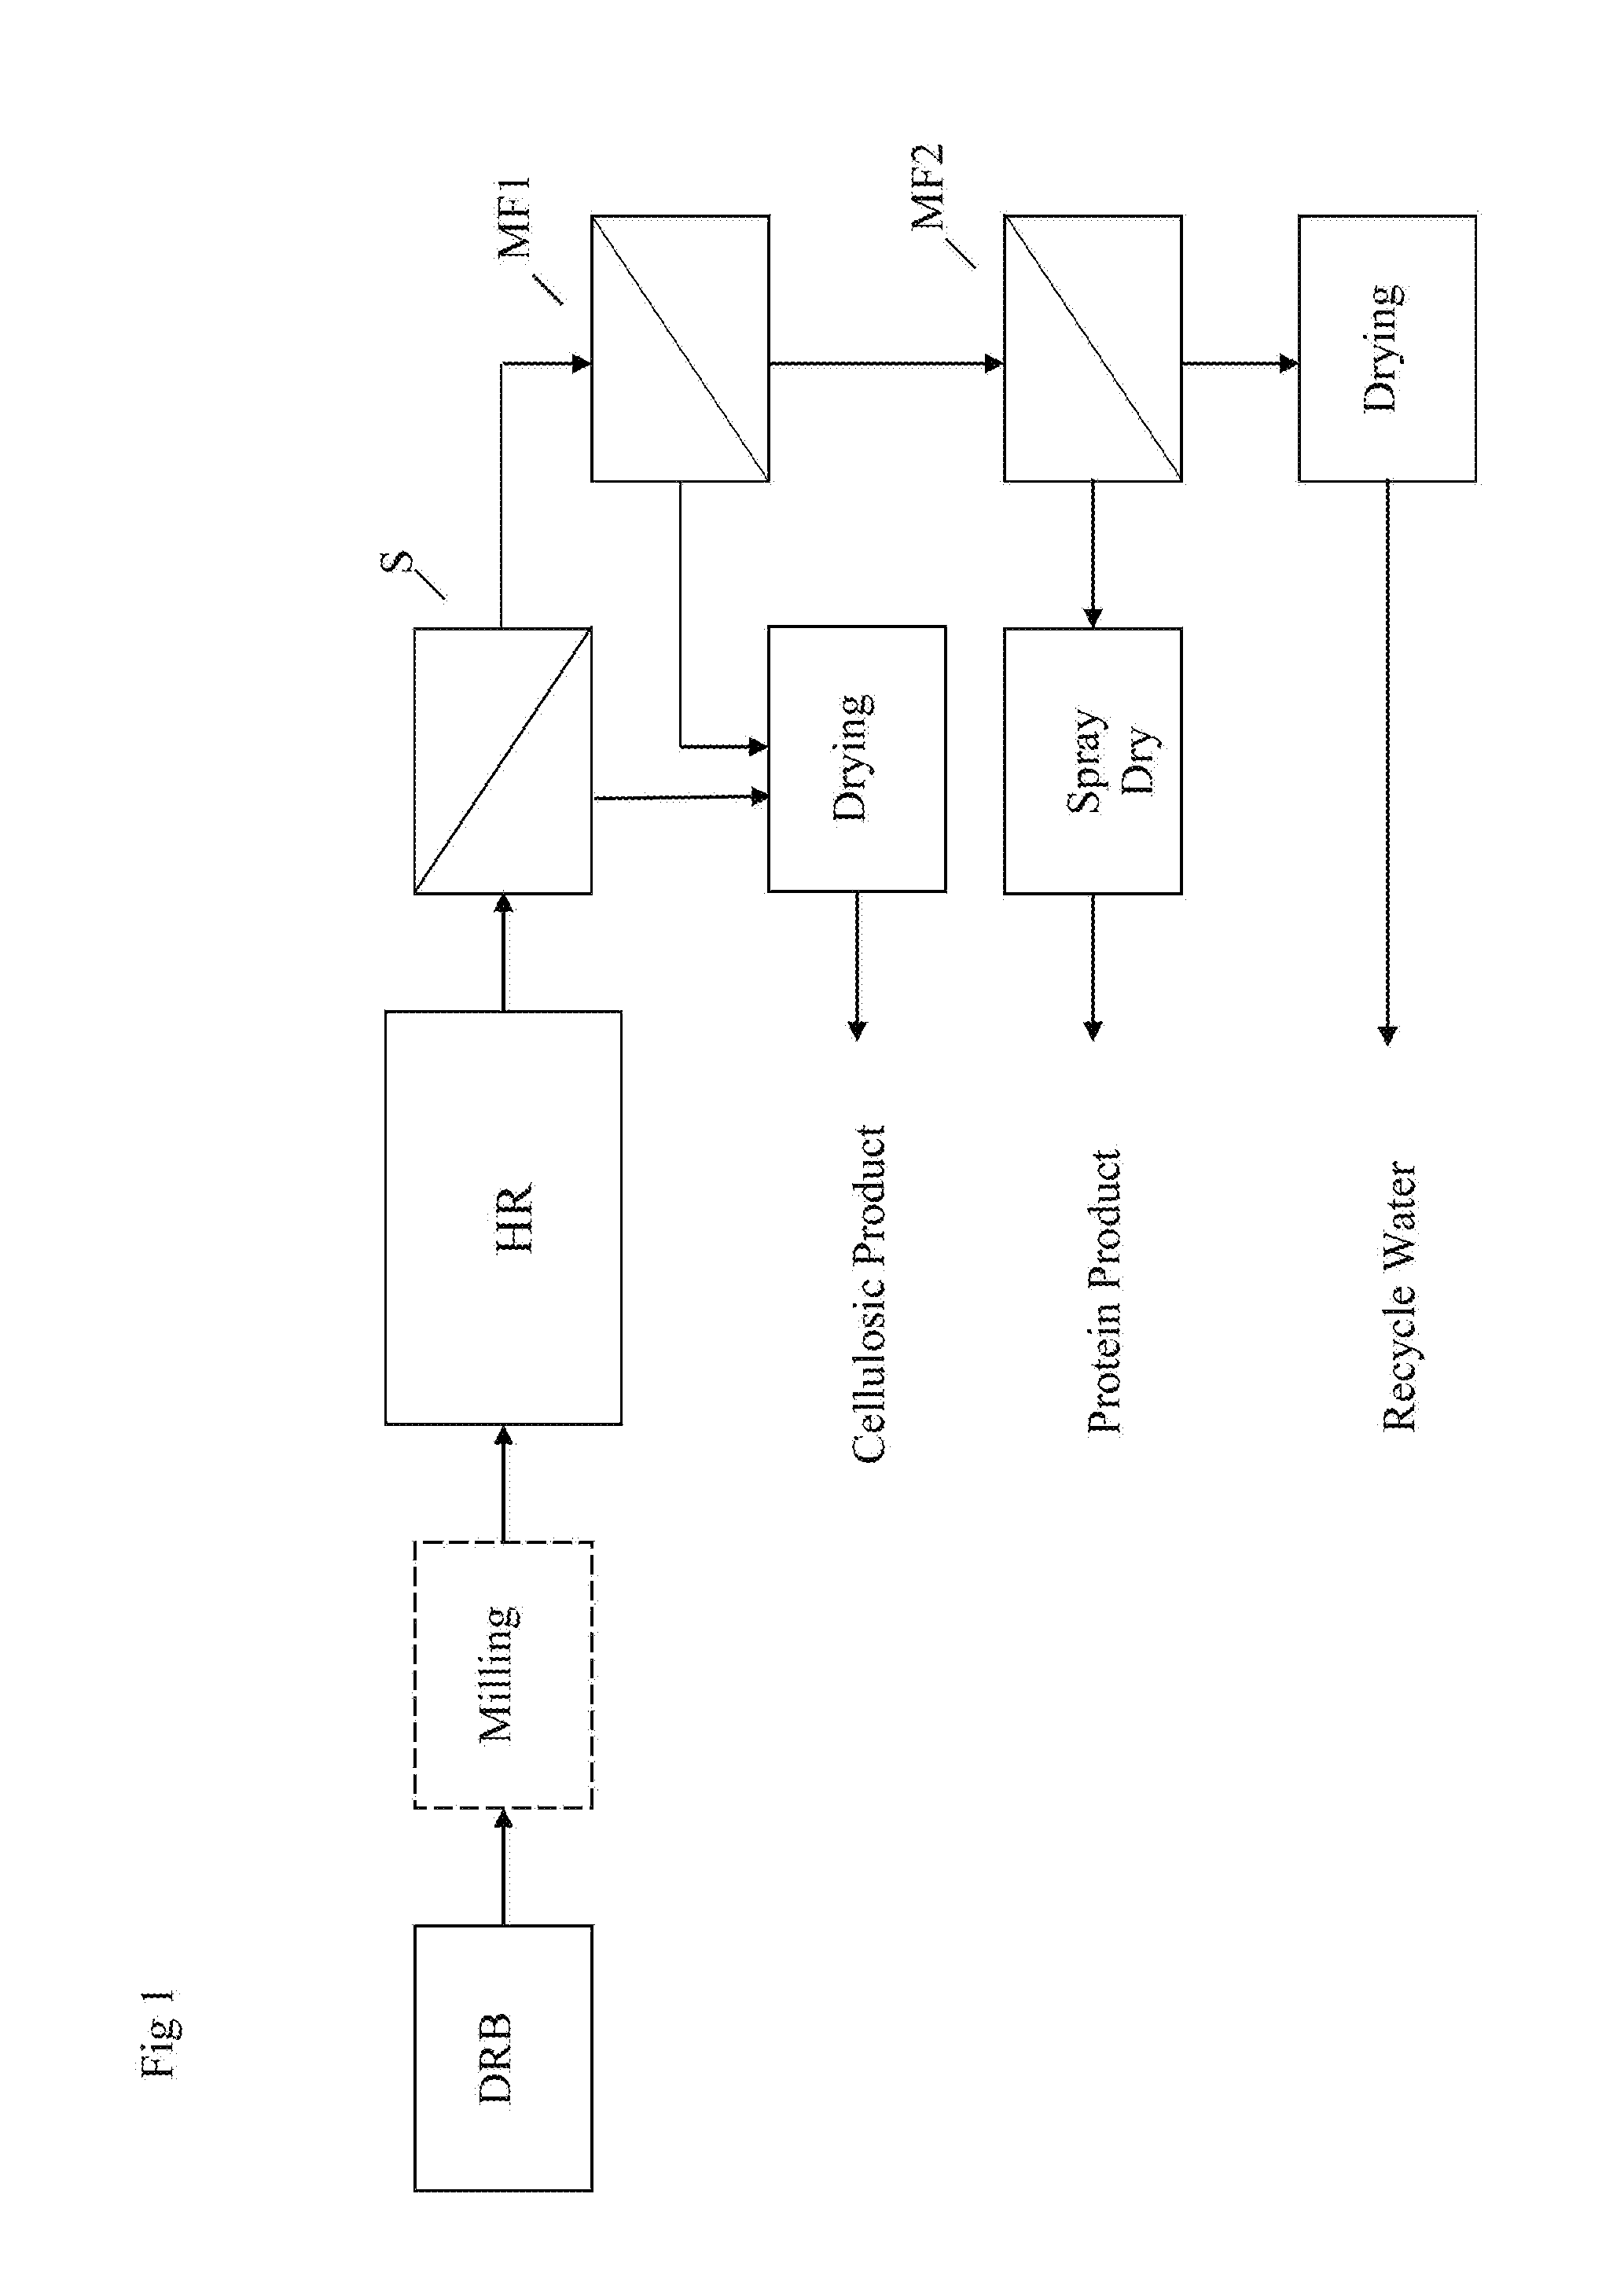 Process for Producing Protein Concentrate and A Cellulosic Residue Material From Defatted Rice Bran